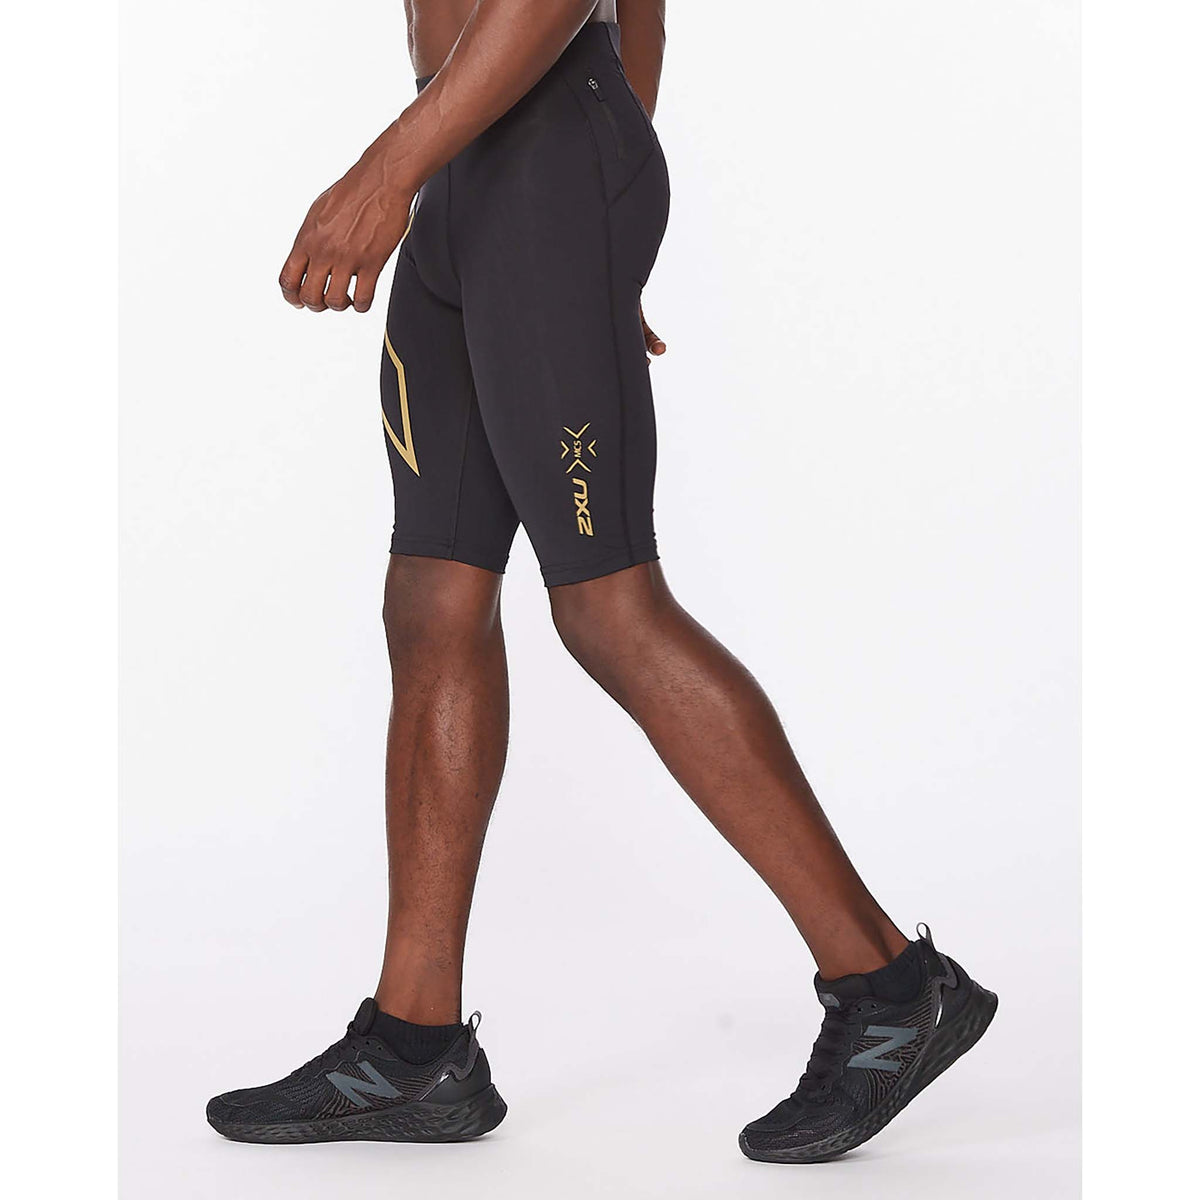 2XU Light Speed shorts de compression noir or homme lateral